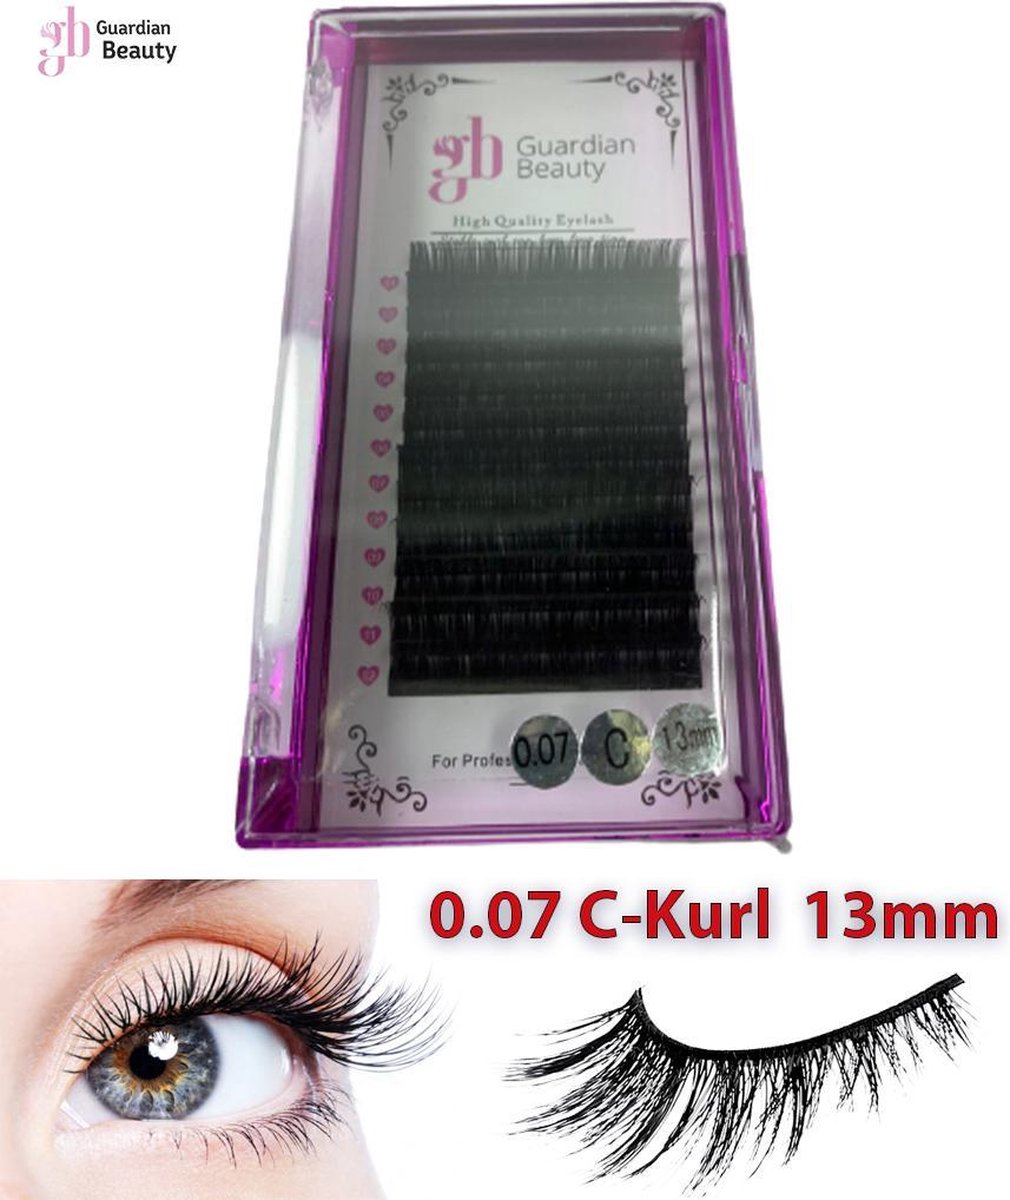 Wimpers Extension 13mm 0.07 C krul | Eyelashes | Wimpers | Wimperextensions